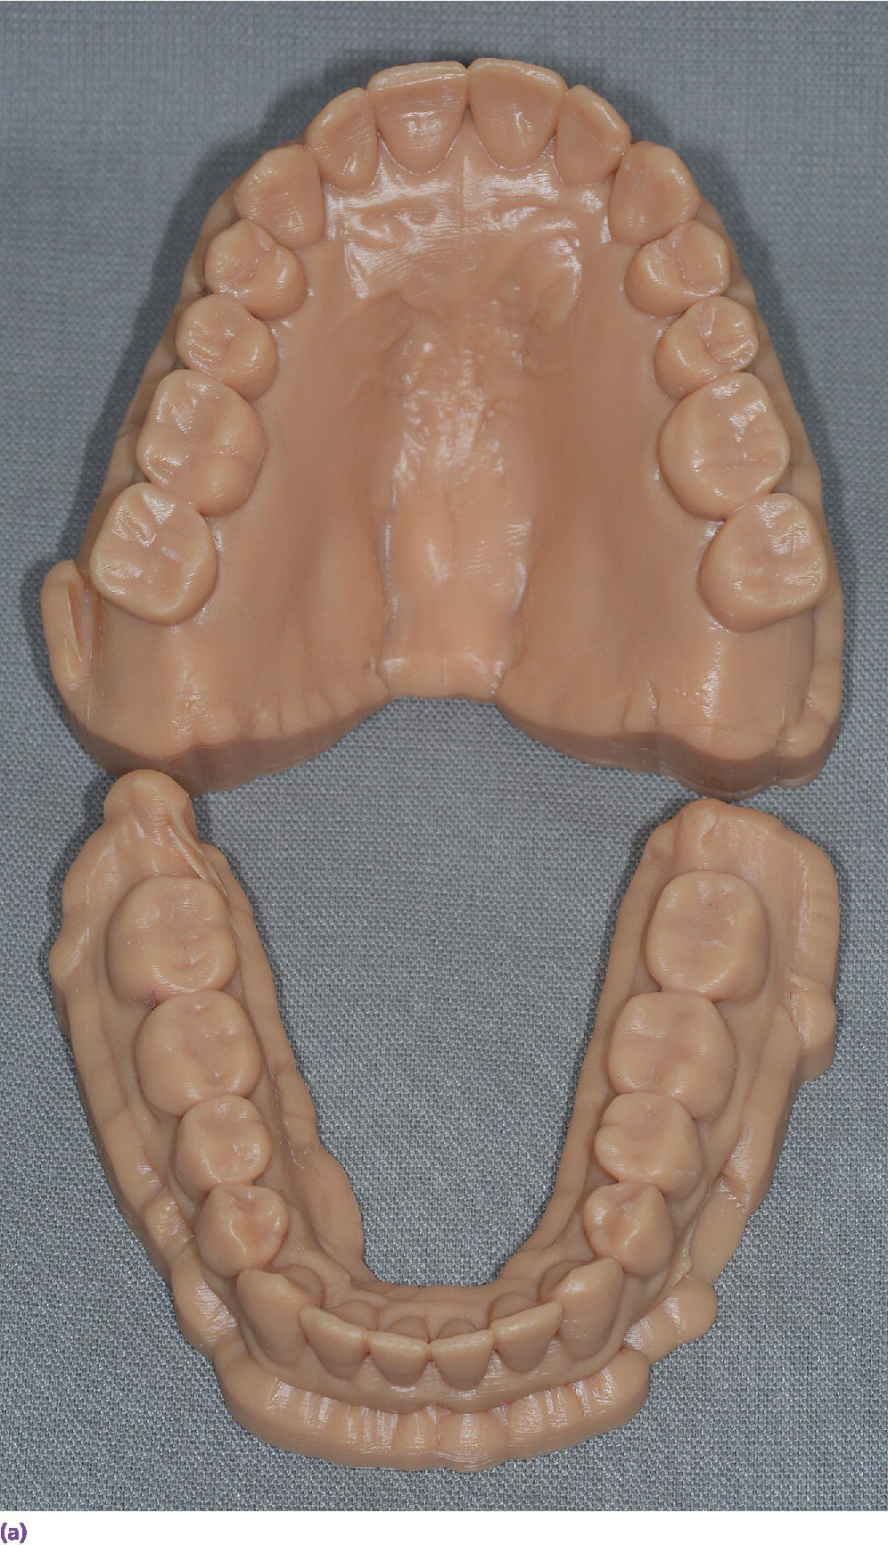 Photo displaying example of three-dimensionally printed casts for maxilla and mandible with complete set of teeth.